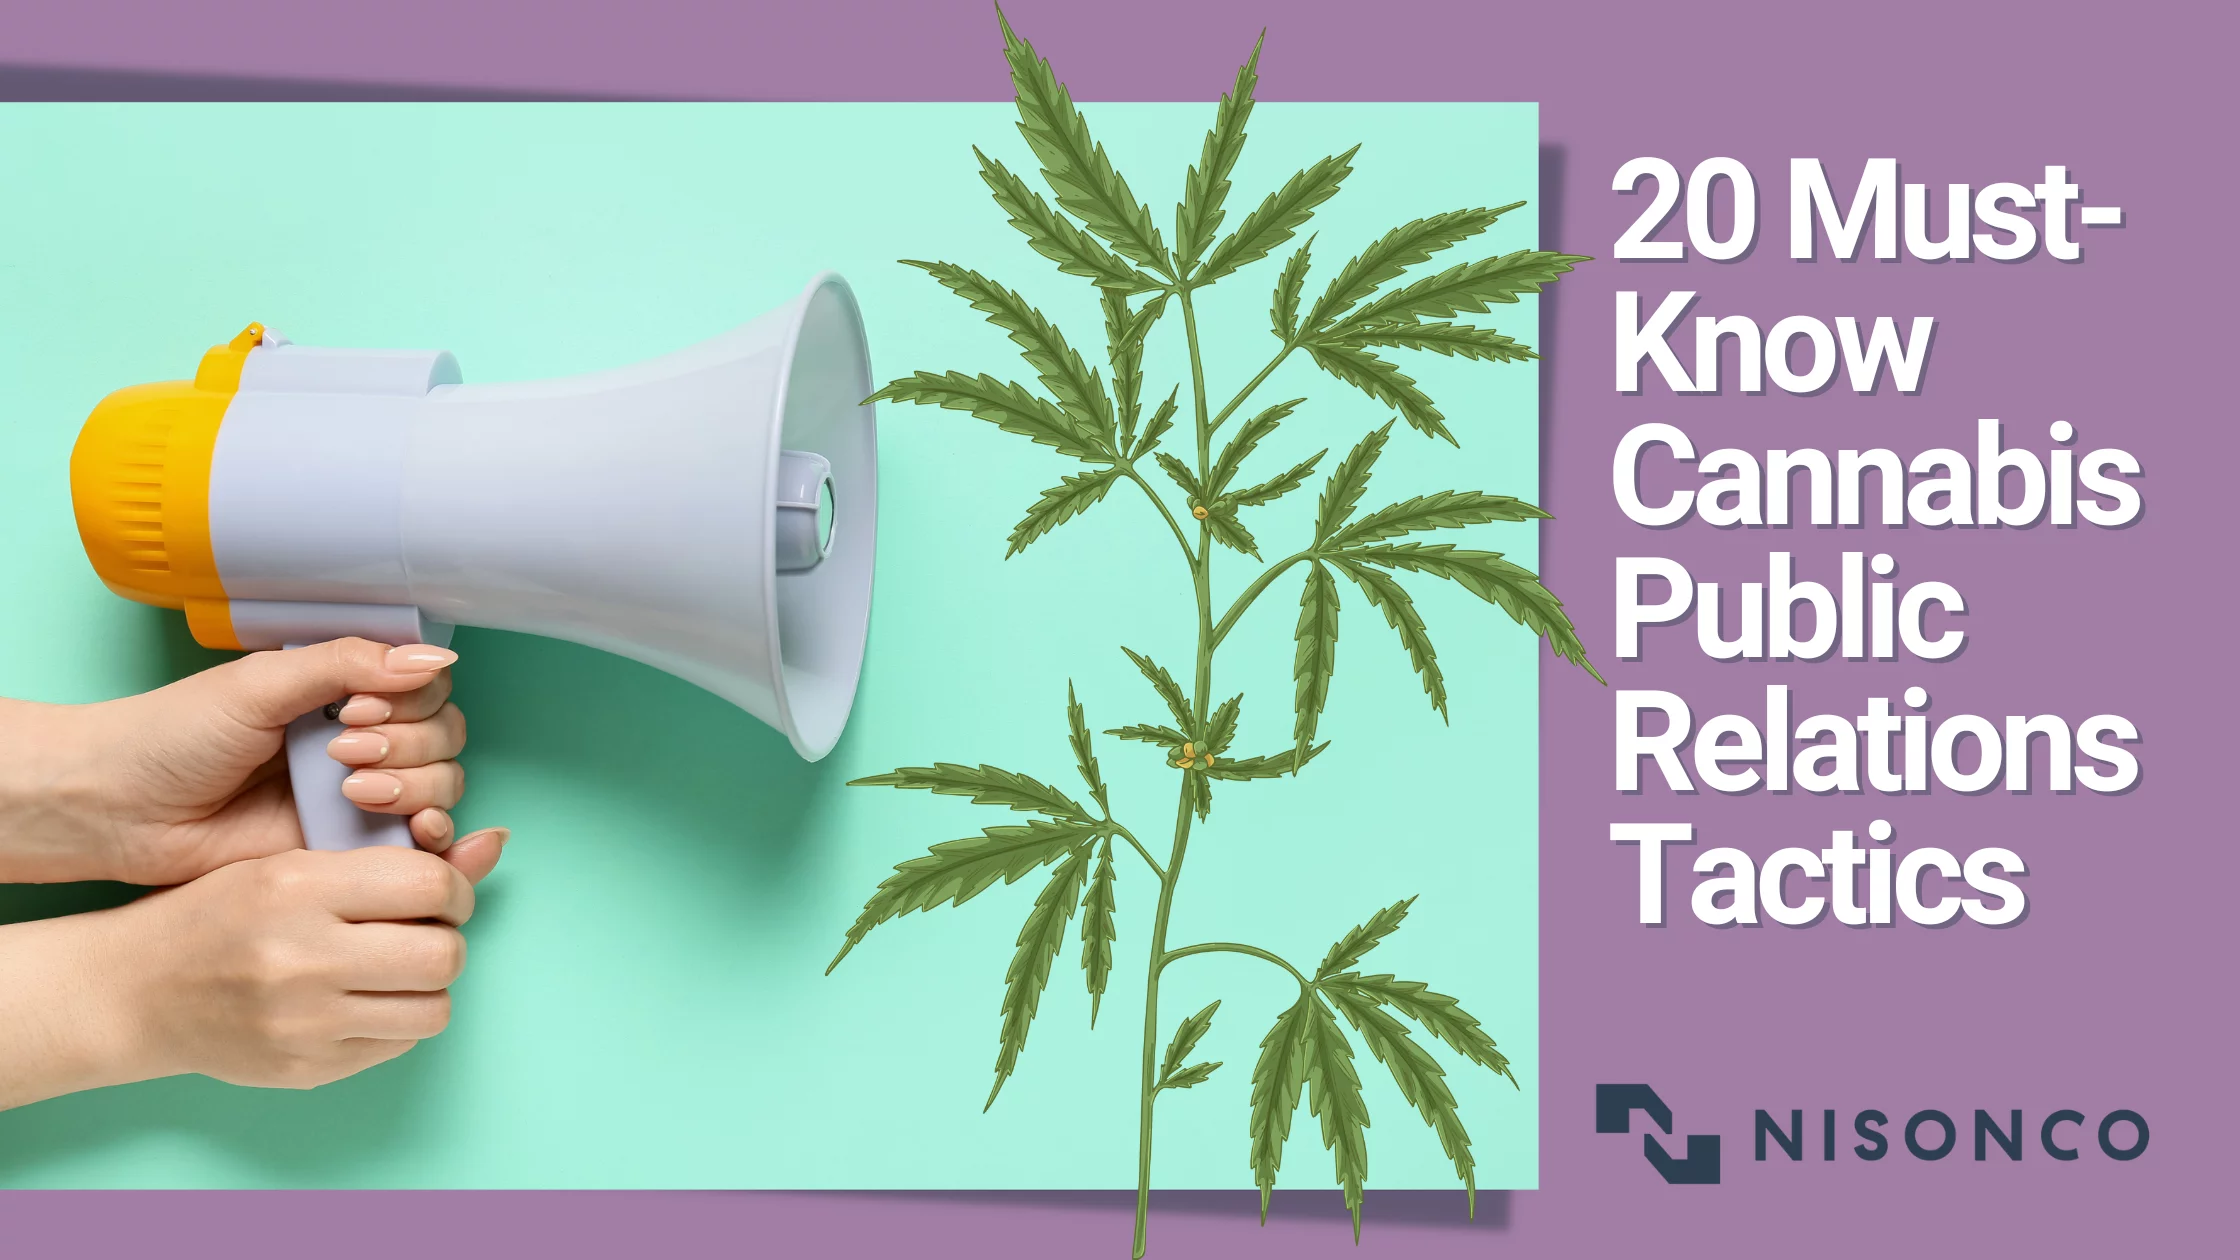 A megaphone and cannabis plant appear alongside the text 20 Must-Know Cannabis Public Relations Tactics.